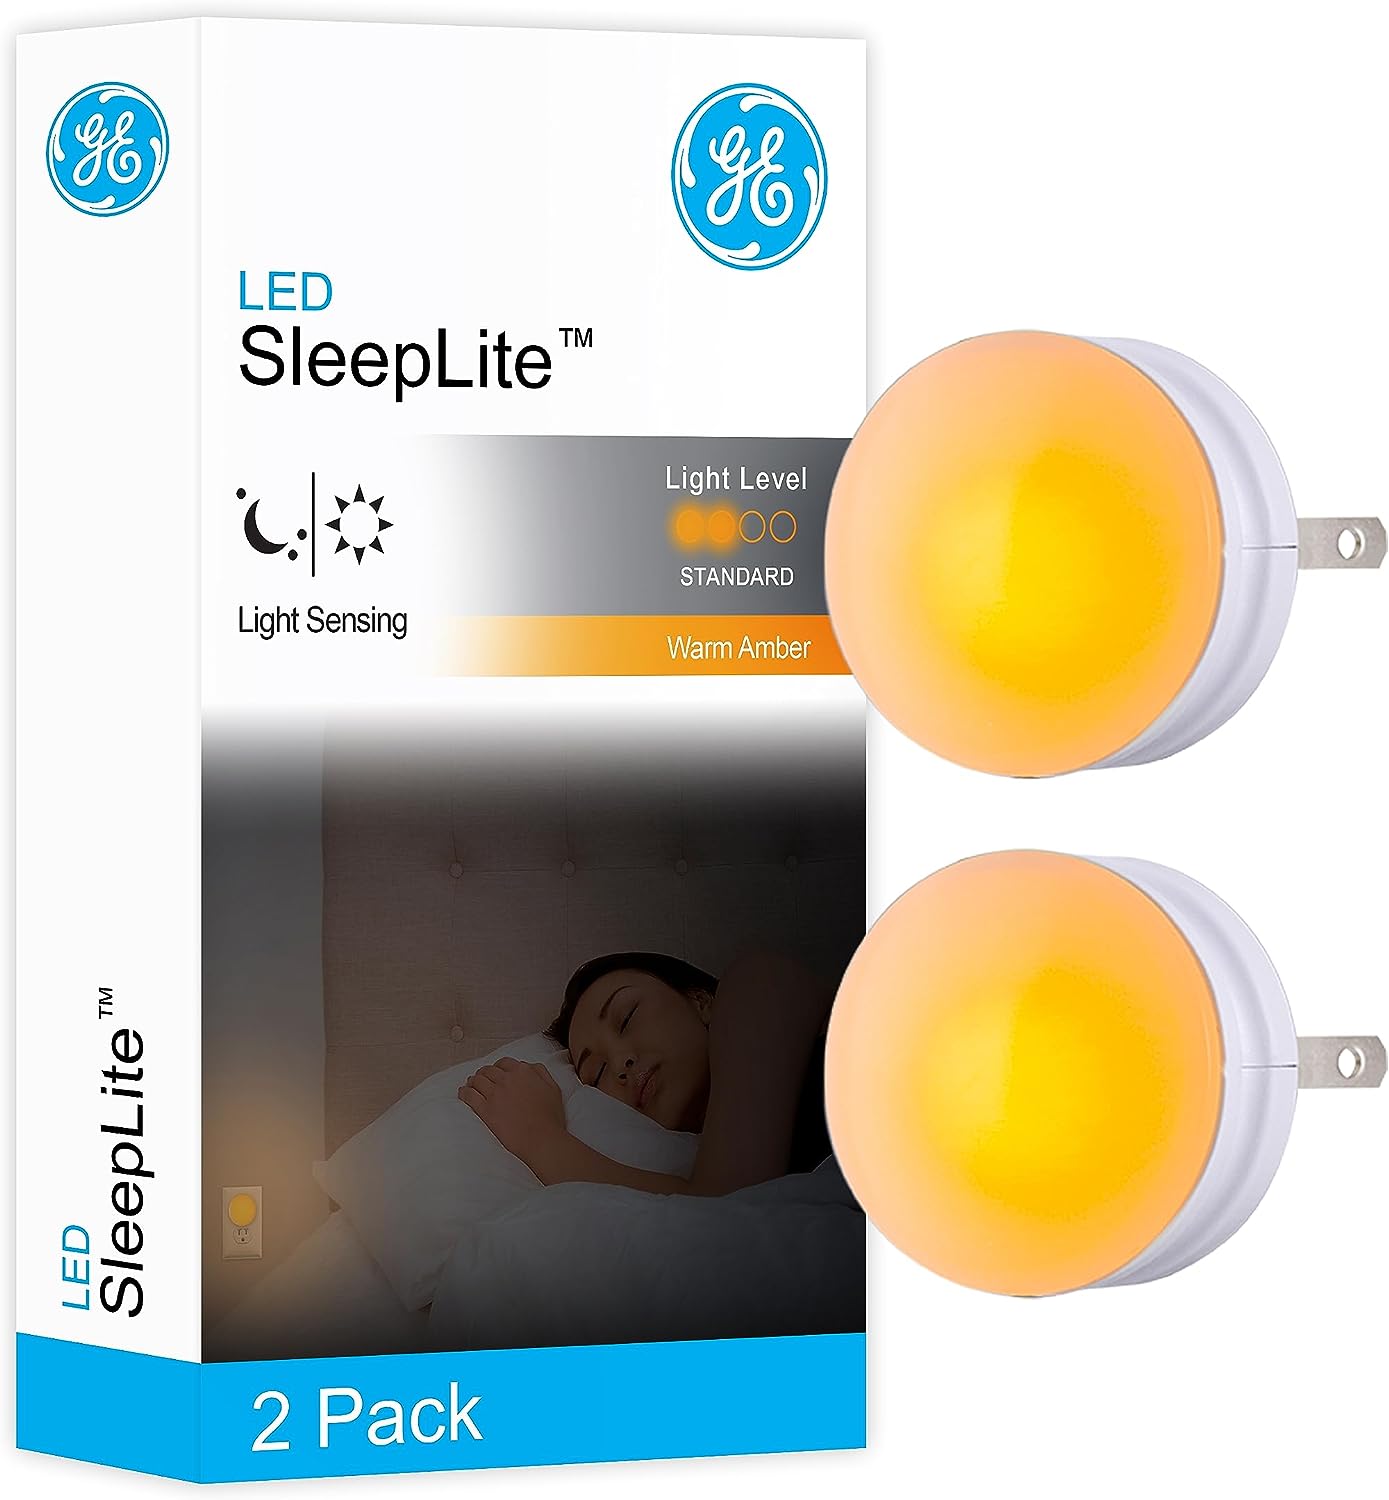 GE SleepLite LED Night Light, 2 Pack, Melatonin, Dusk-to-Dawn Sensor, Natural Sleep Aid, Warm Amber, Compact, Ideal for Bedroom, Nursery, Bathroom, Hallway, 45247, 2 CountGreat little night lights. I have one in the bathroom and one in the kitchen. It' just enough to navigate the area around it and has a very pleasant soft yellow glow that' easy on dark adjusted eyes. And I don't have one in the bedroom but I'd feel confident saying it would be quite nice as it is in the other rooms. Not brigh